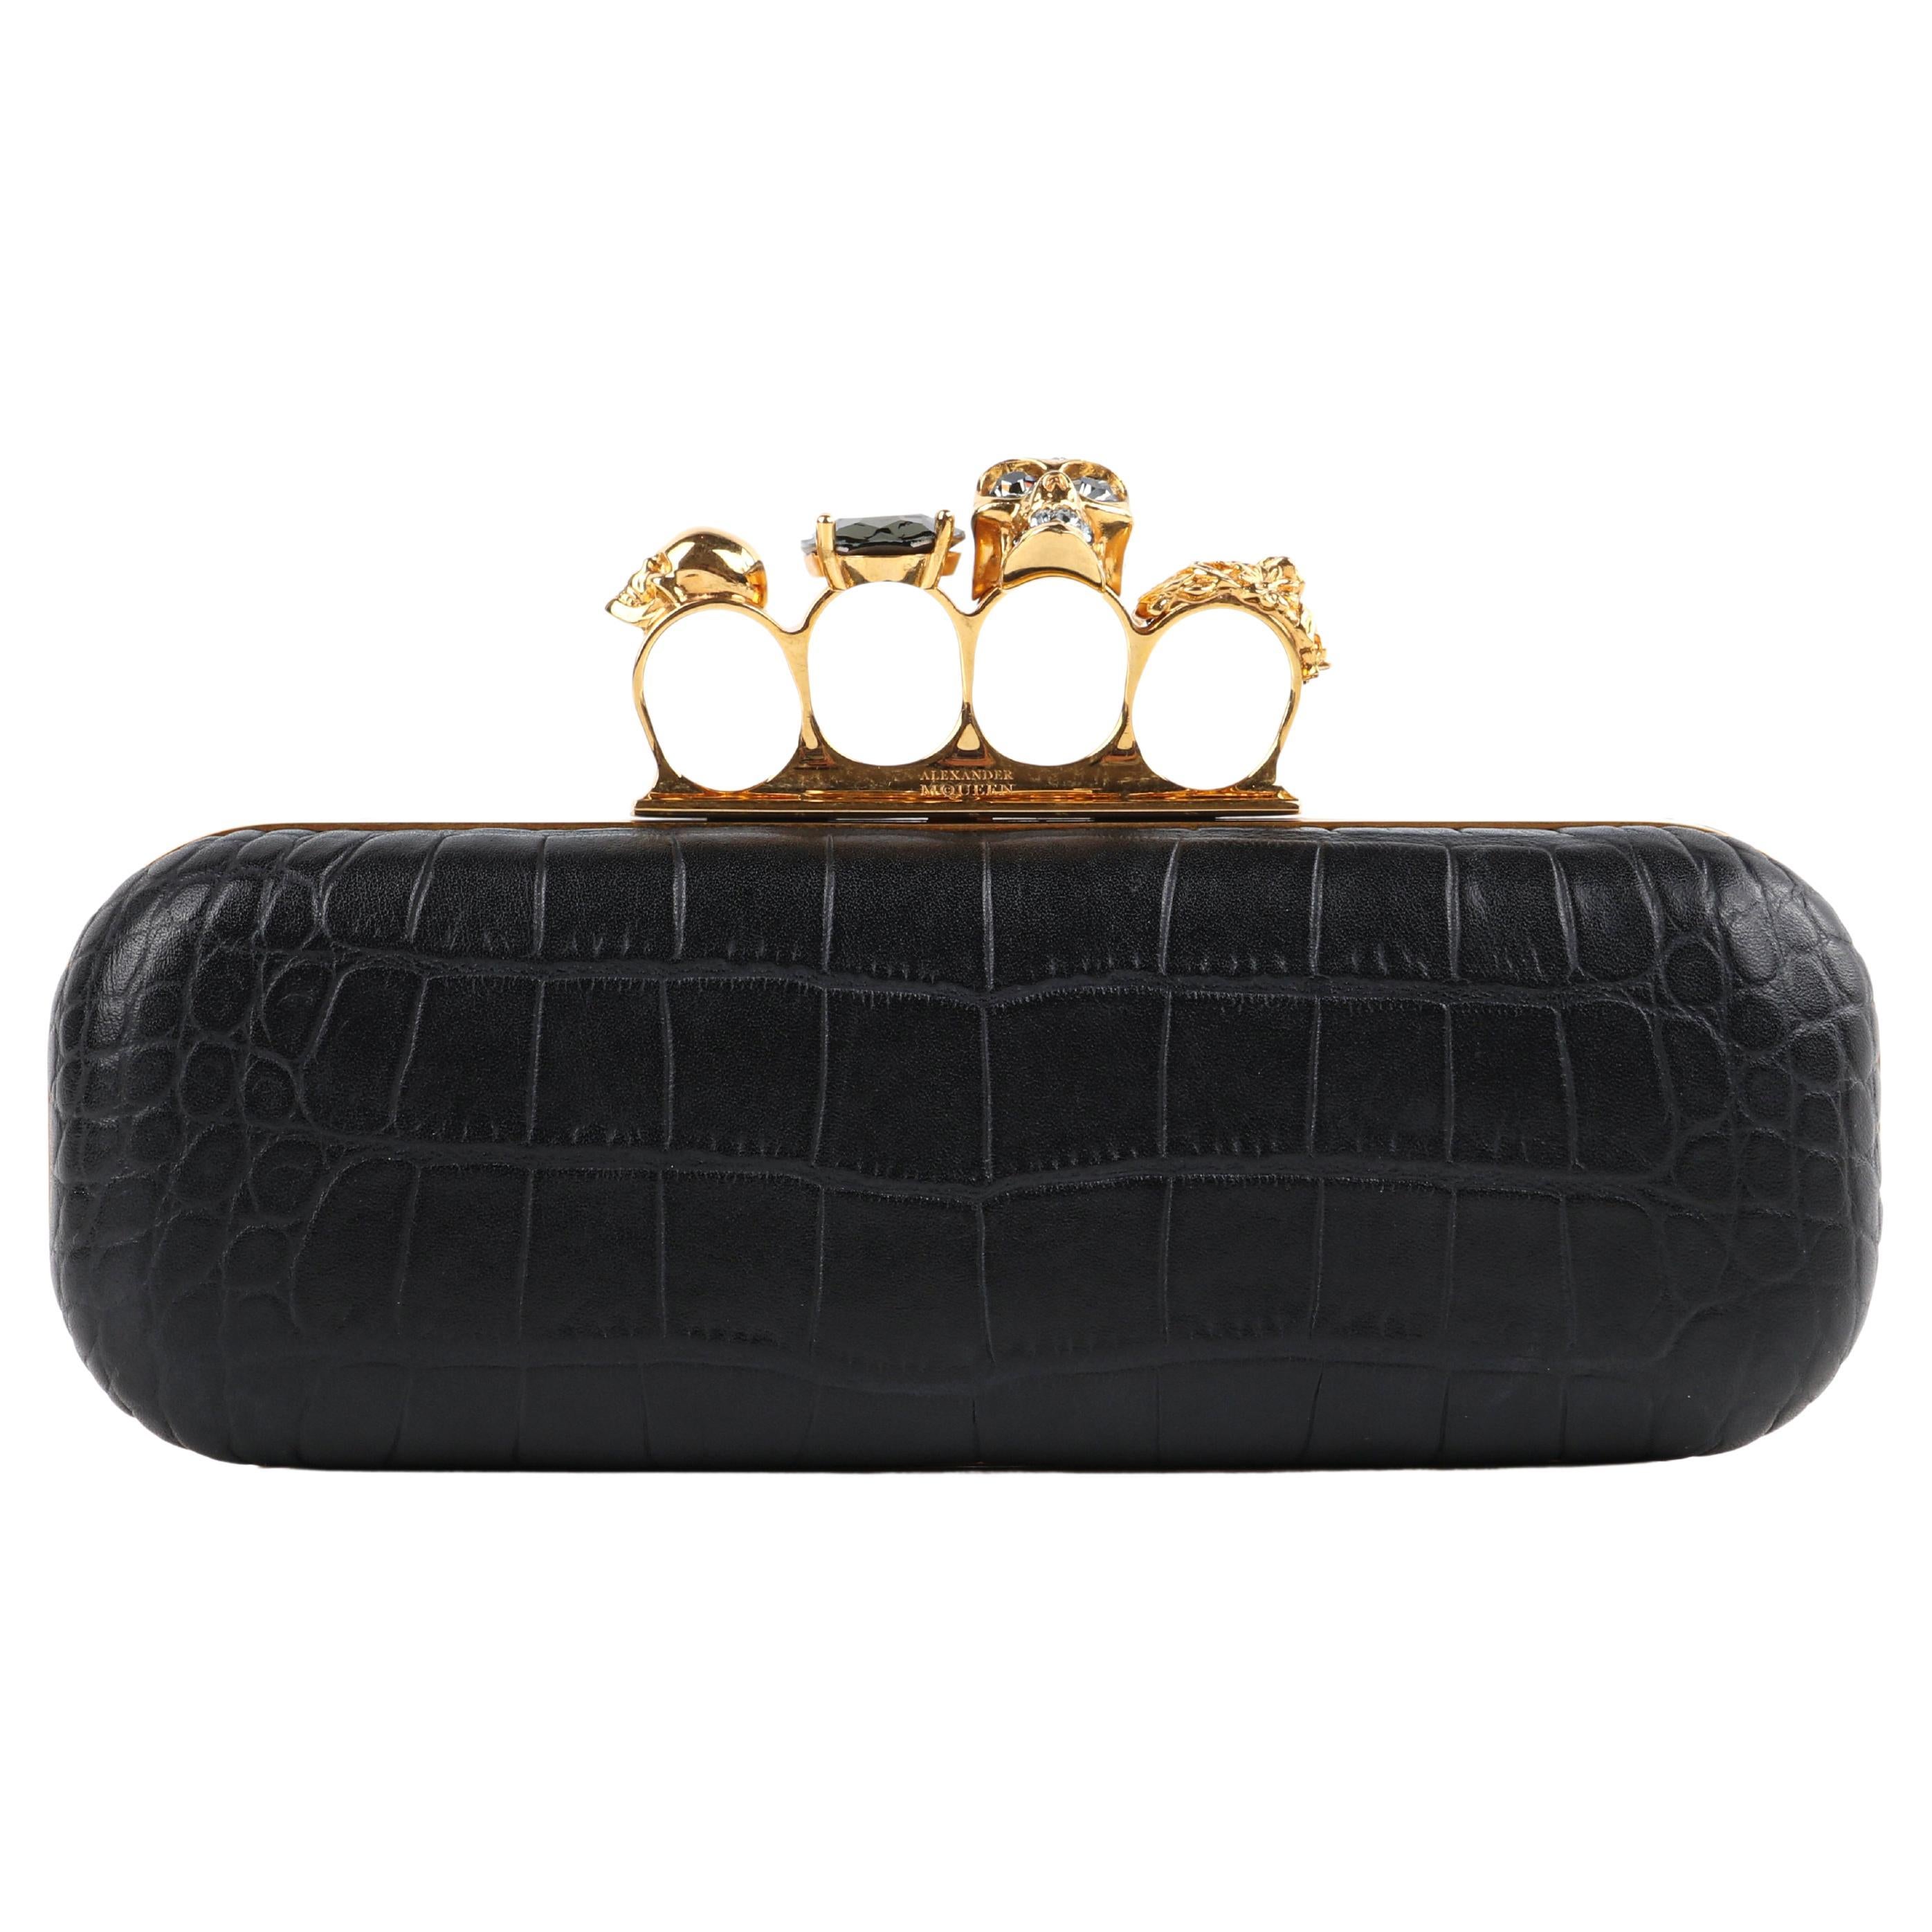 ALEXANDER McQUEEN Black Croc Embossed Leather Knuckle Duster Box Clutch w/Box